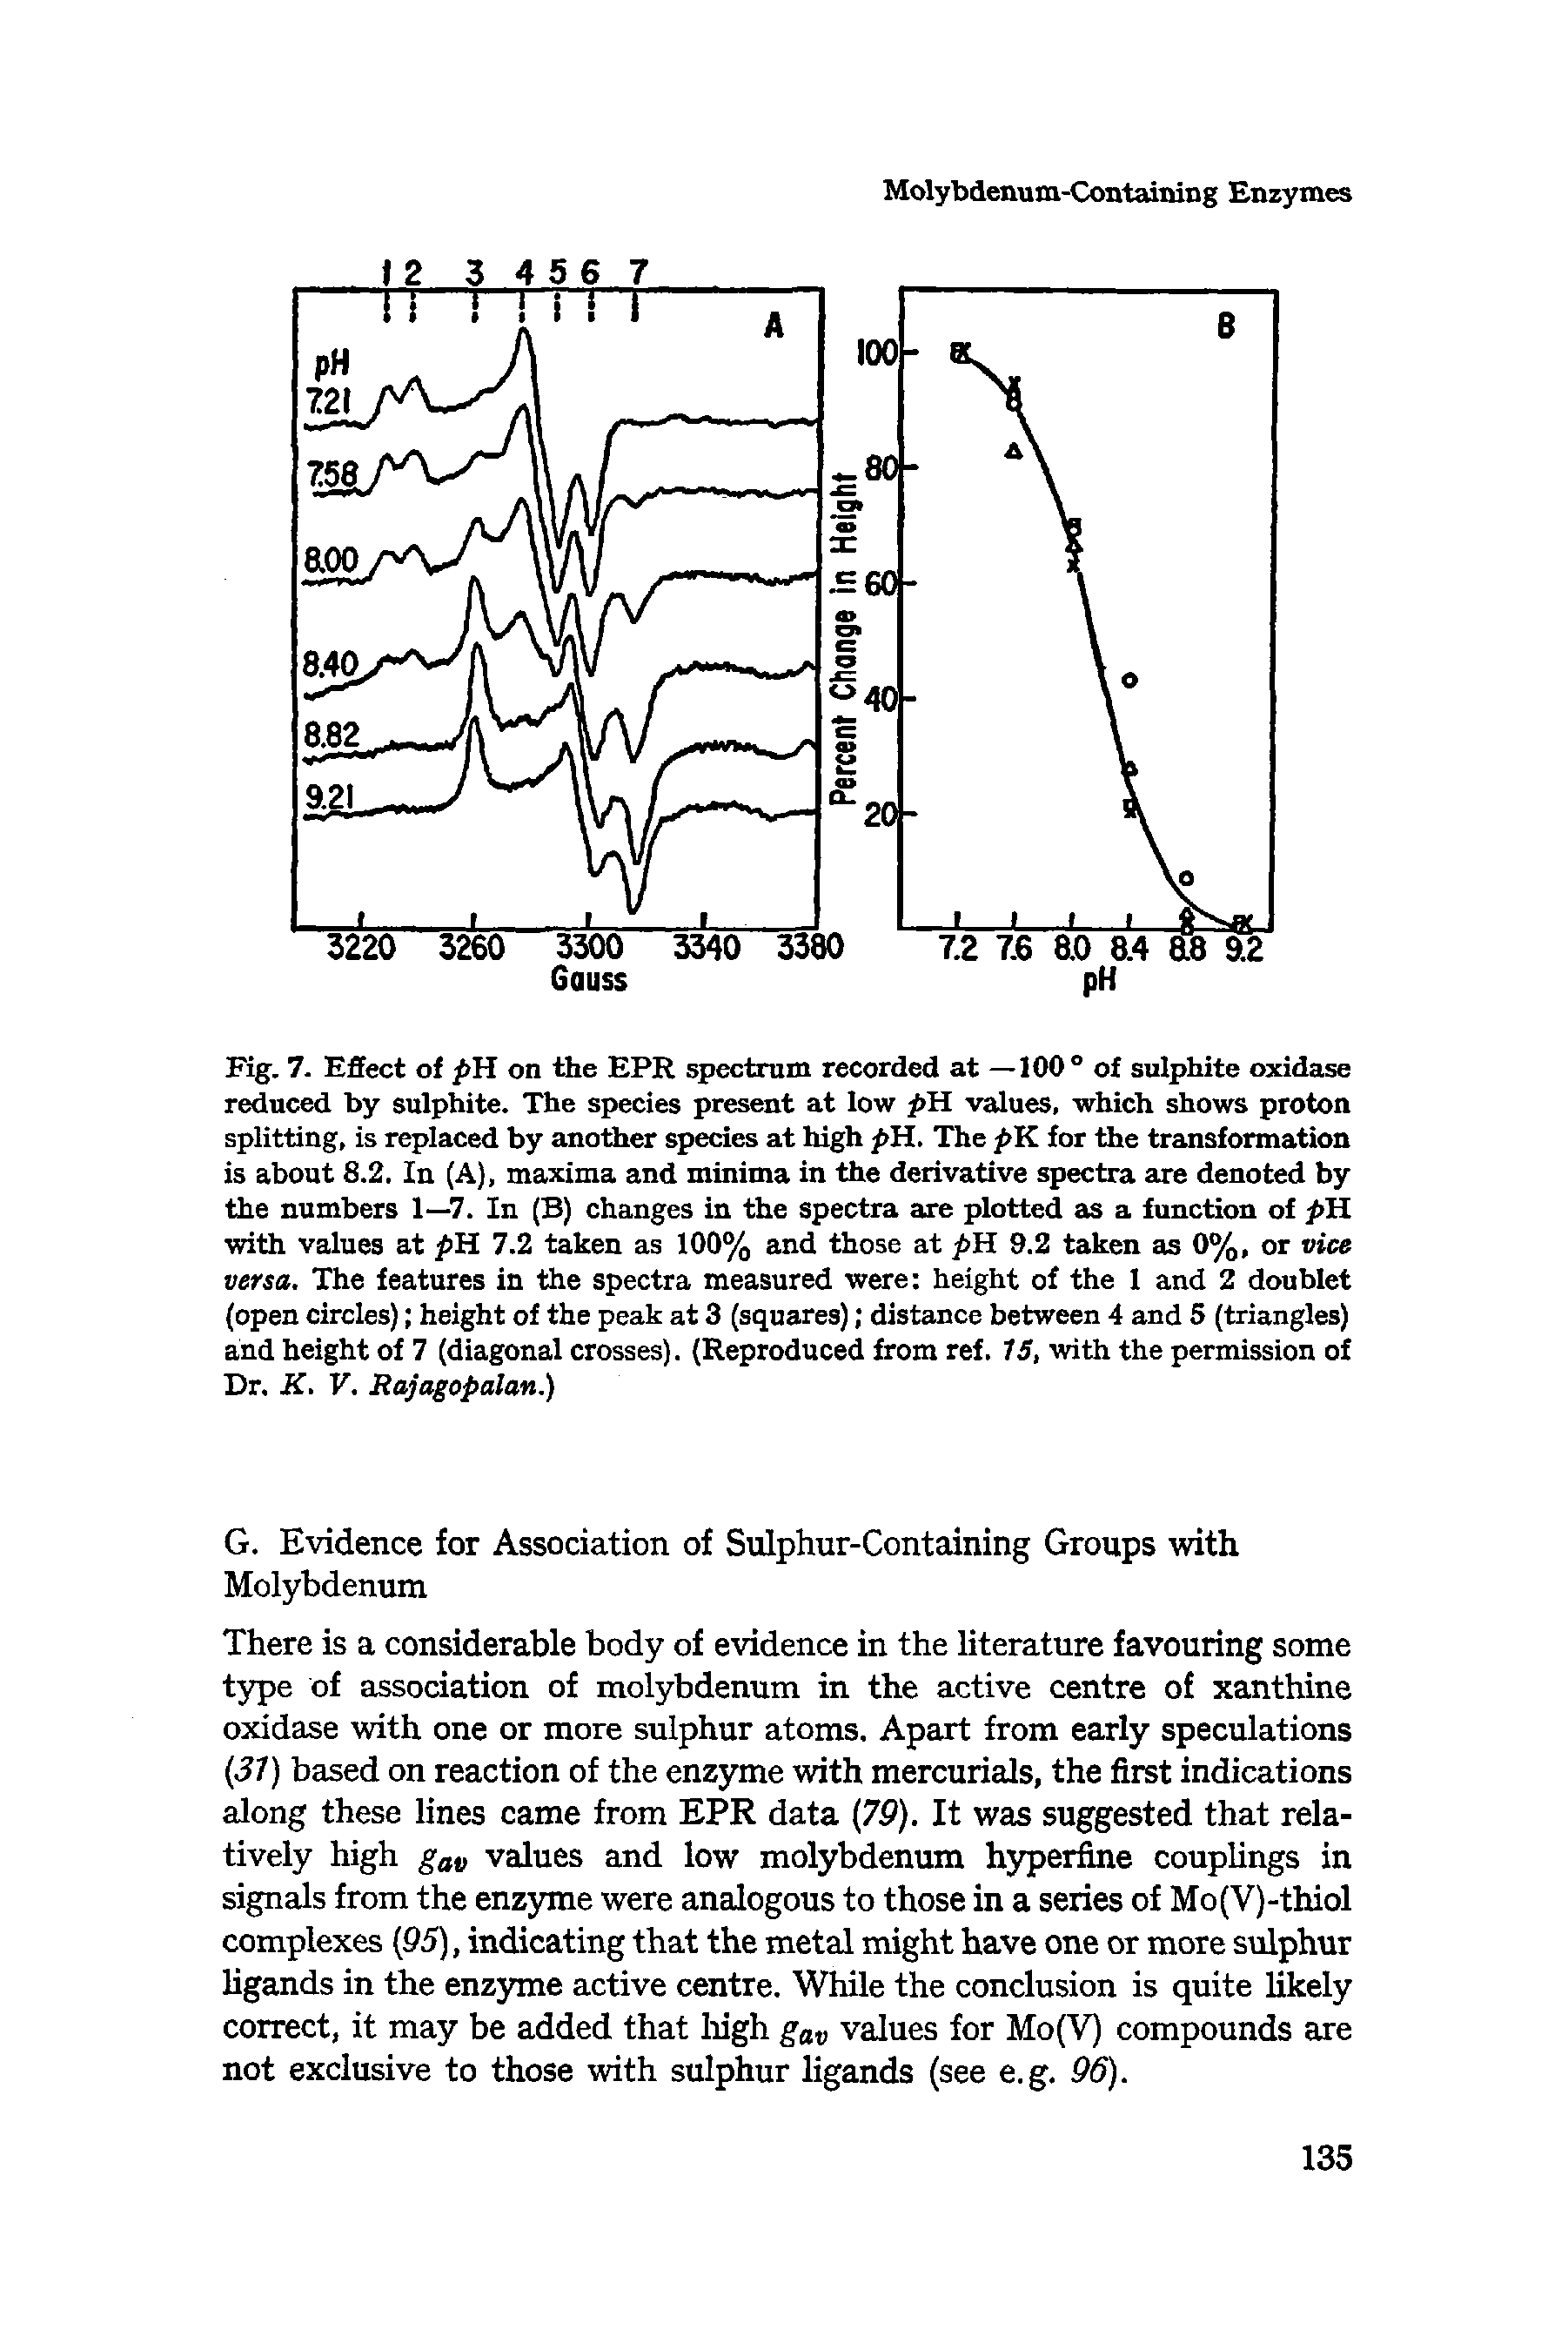 Fig. 7. Effect of pH on the EPR spectrum recorded at —100° of sulphite oxidase reduced by sulphite. The species present at low pH values, which shows proton splitting, is replaced by another species at high pH. The pH. for the transformation is about 8.2, In (A), maxima and minima in the derivative spectra are denoted by the numbers 1—7. In (B) changes in the spectra are plotted as a function of pH. with values at pH 7.2 taken as 100% and those at pH 9.2 taken as 0%, or vice versa. The features in the spectra measured were height of the 1 and 2 doublet (open circles) height of the peak at 3 (squares) distance between 4 and 5 (triangles) and height of 7 (diagonal crosses). (Reproduced from ref. 15, with the permission of Dr. K. V. Rajagopalan.)...